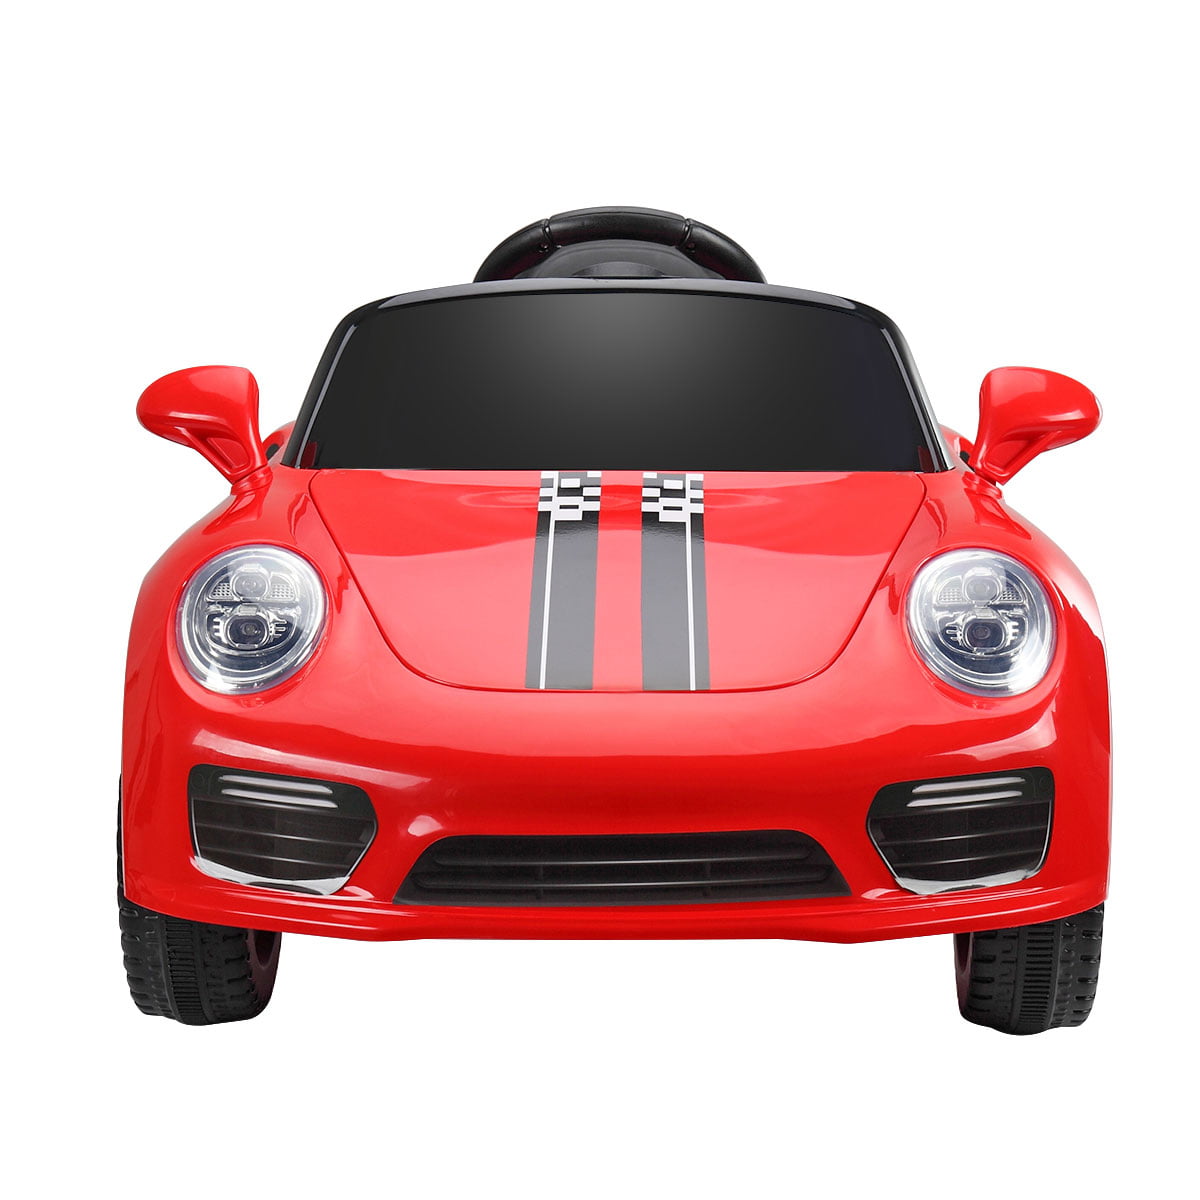 12v Kids Ride on Electric Car with Remote Control, LED Headlights & MP3 Function, 3 Speed Kids Ride on Car Suitable for 1-4 Years, 12V Kids Ride on Car Electric Car for Boys Girls Gifts, Red, R2589